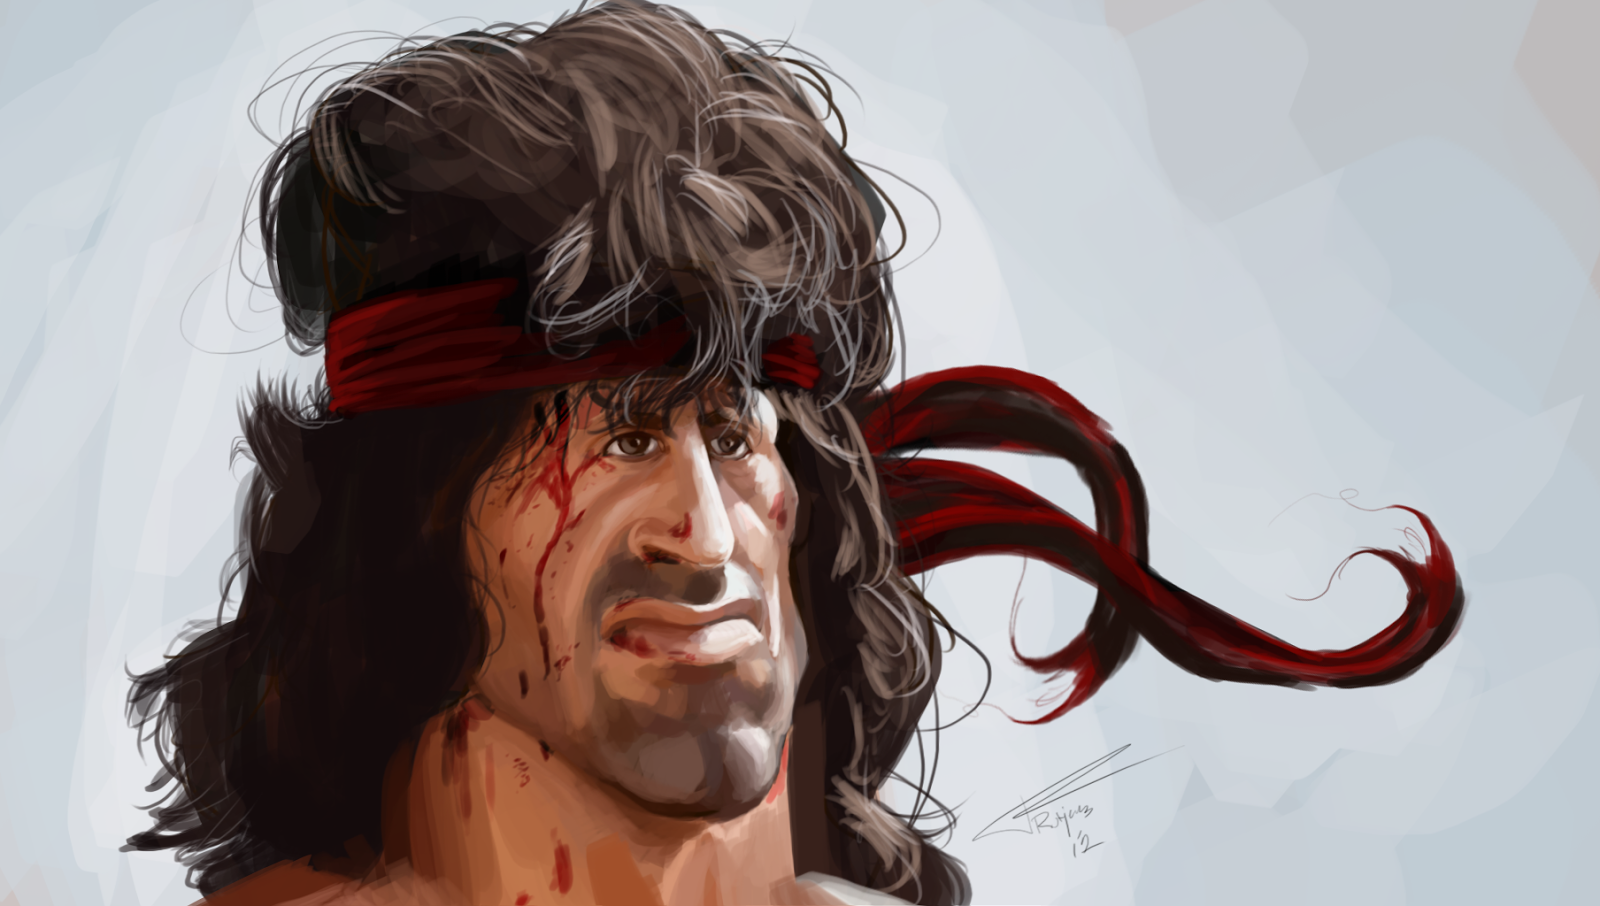 sylvester_stallone_as_rambo_by_tomrutjens-d5c4l1c.png